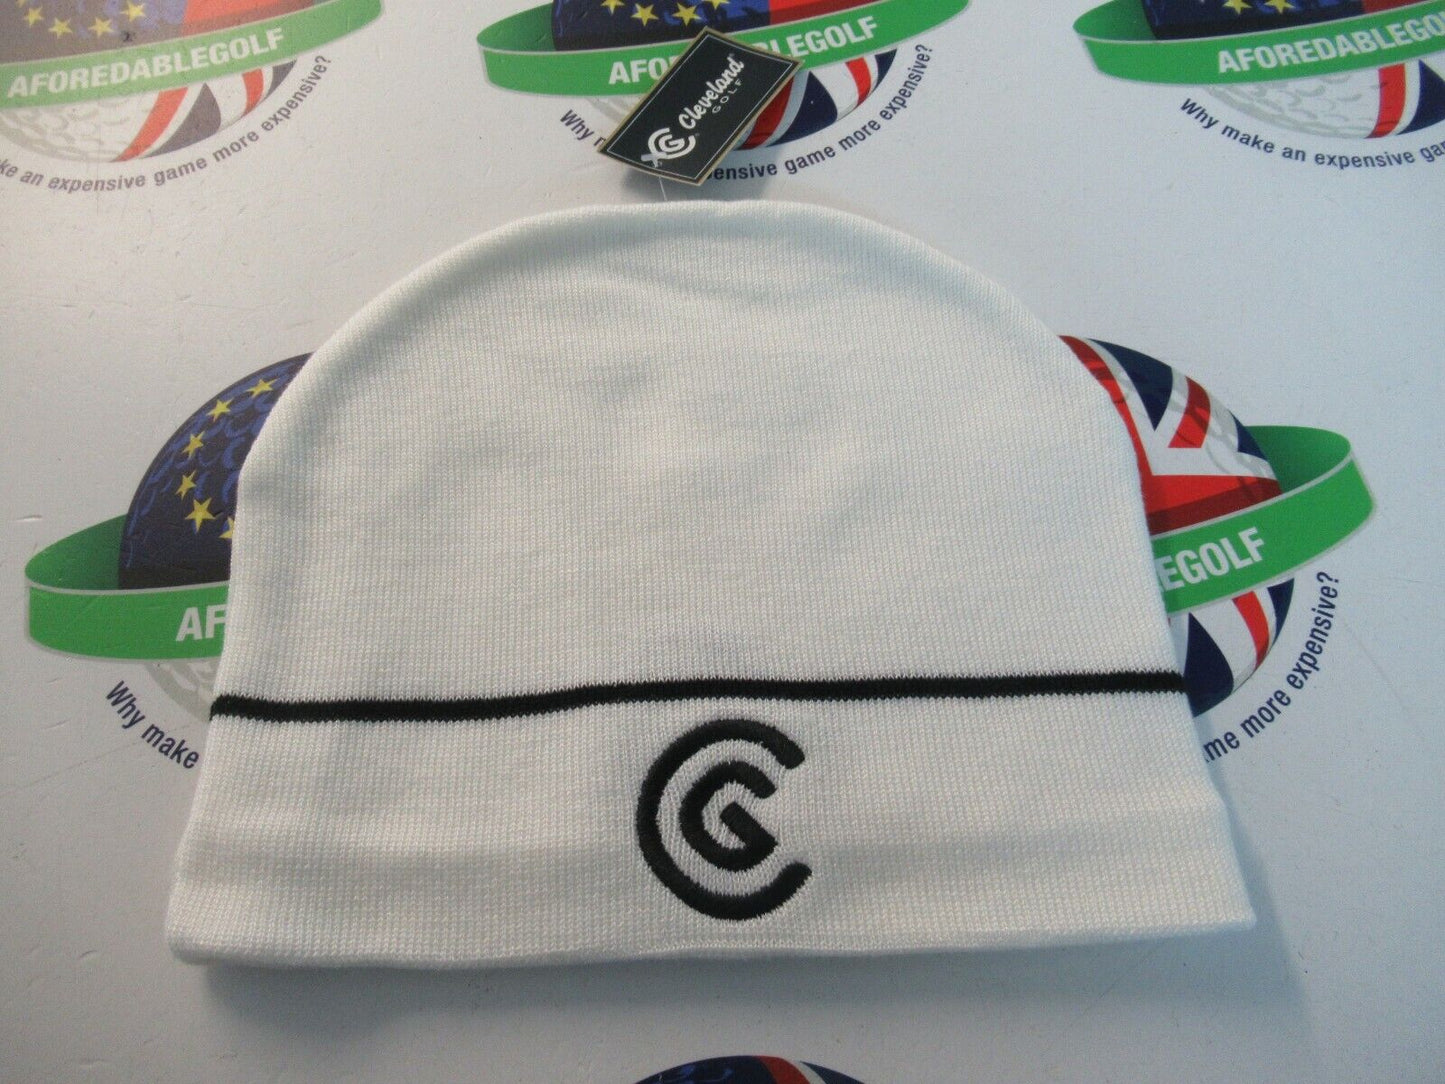 cleveland fleece lined cold weather autumn/winter white beanie hat